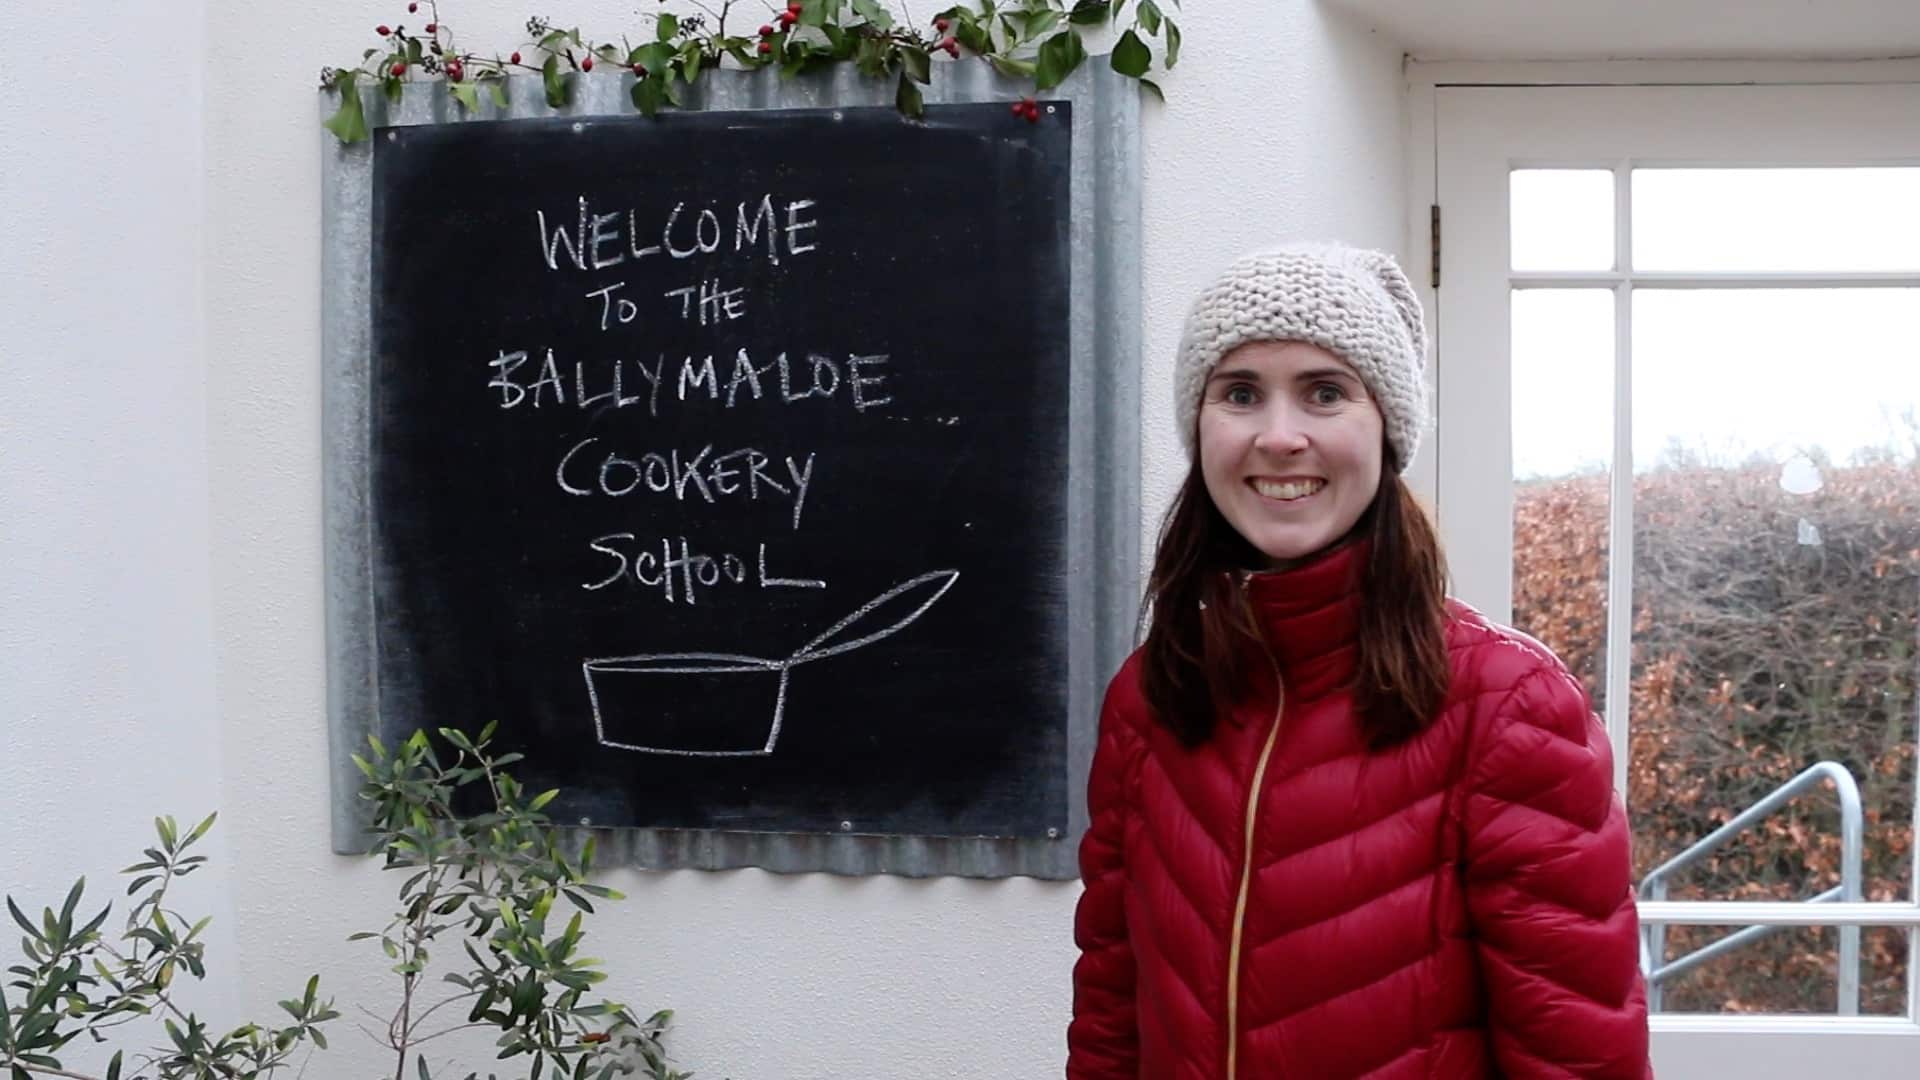 Gemma Stafford is in red, standing next to the "Welcome to the Ballymaloe Cookery School" sign. 